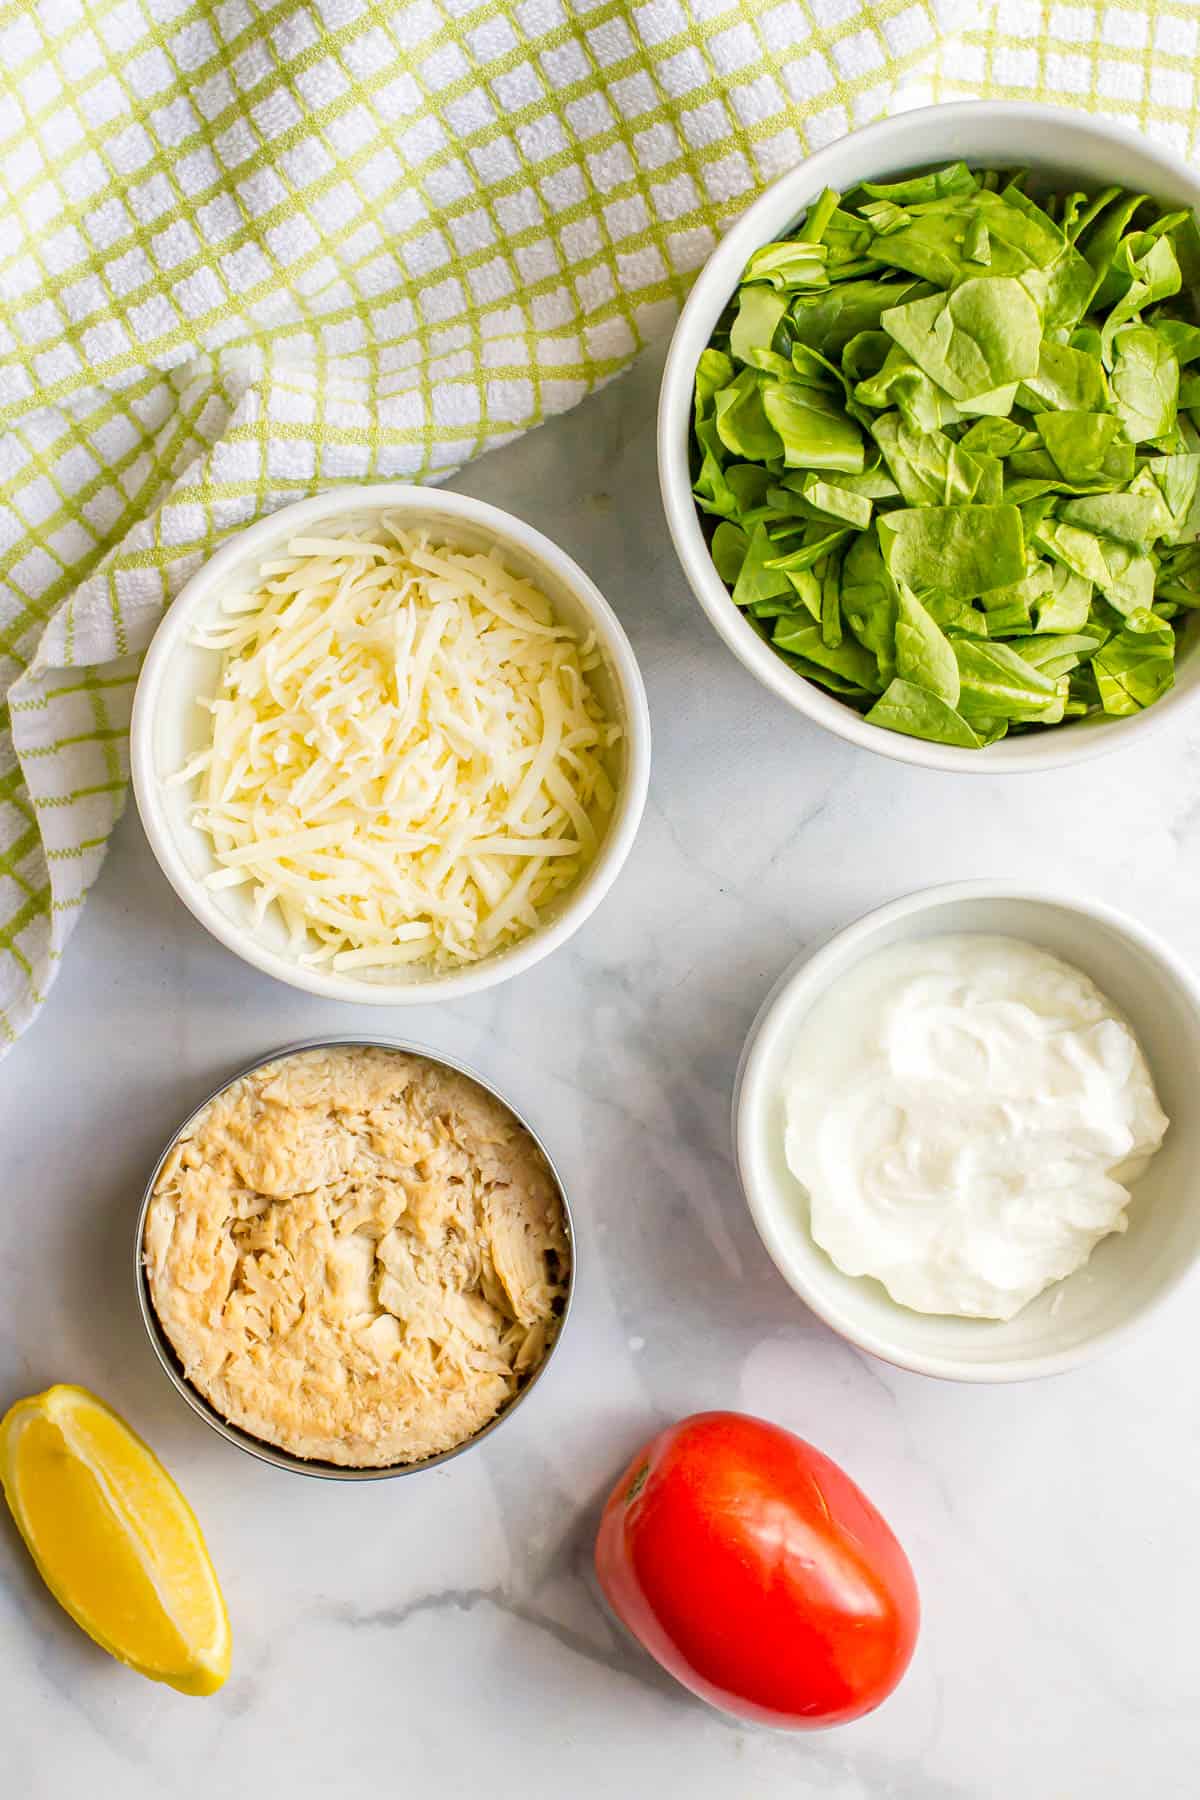 Ingredients laid out in different bowls on a white marble counter for making tuna spinach salad with tomatoes and mozzarella.